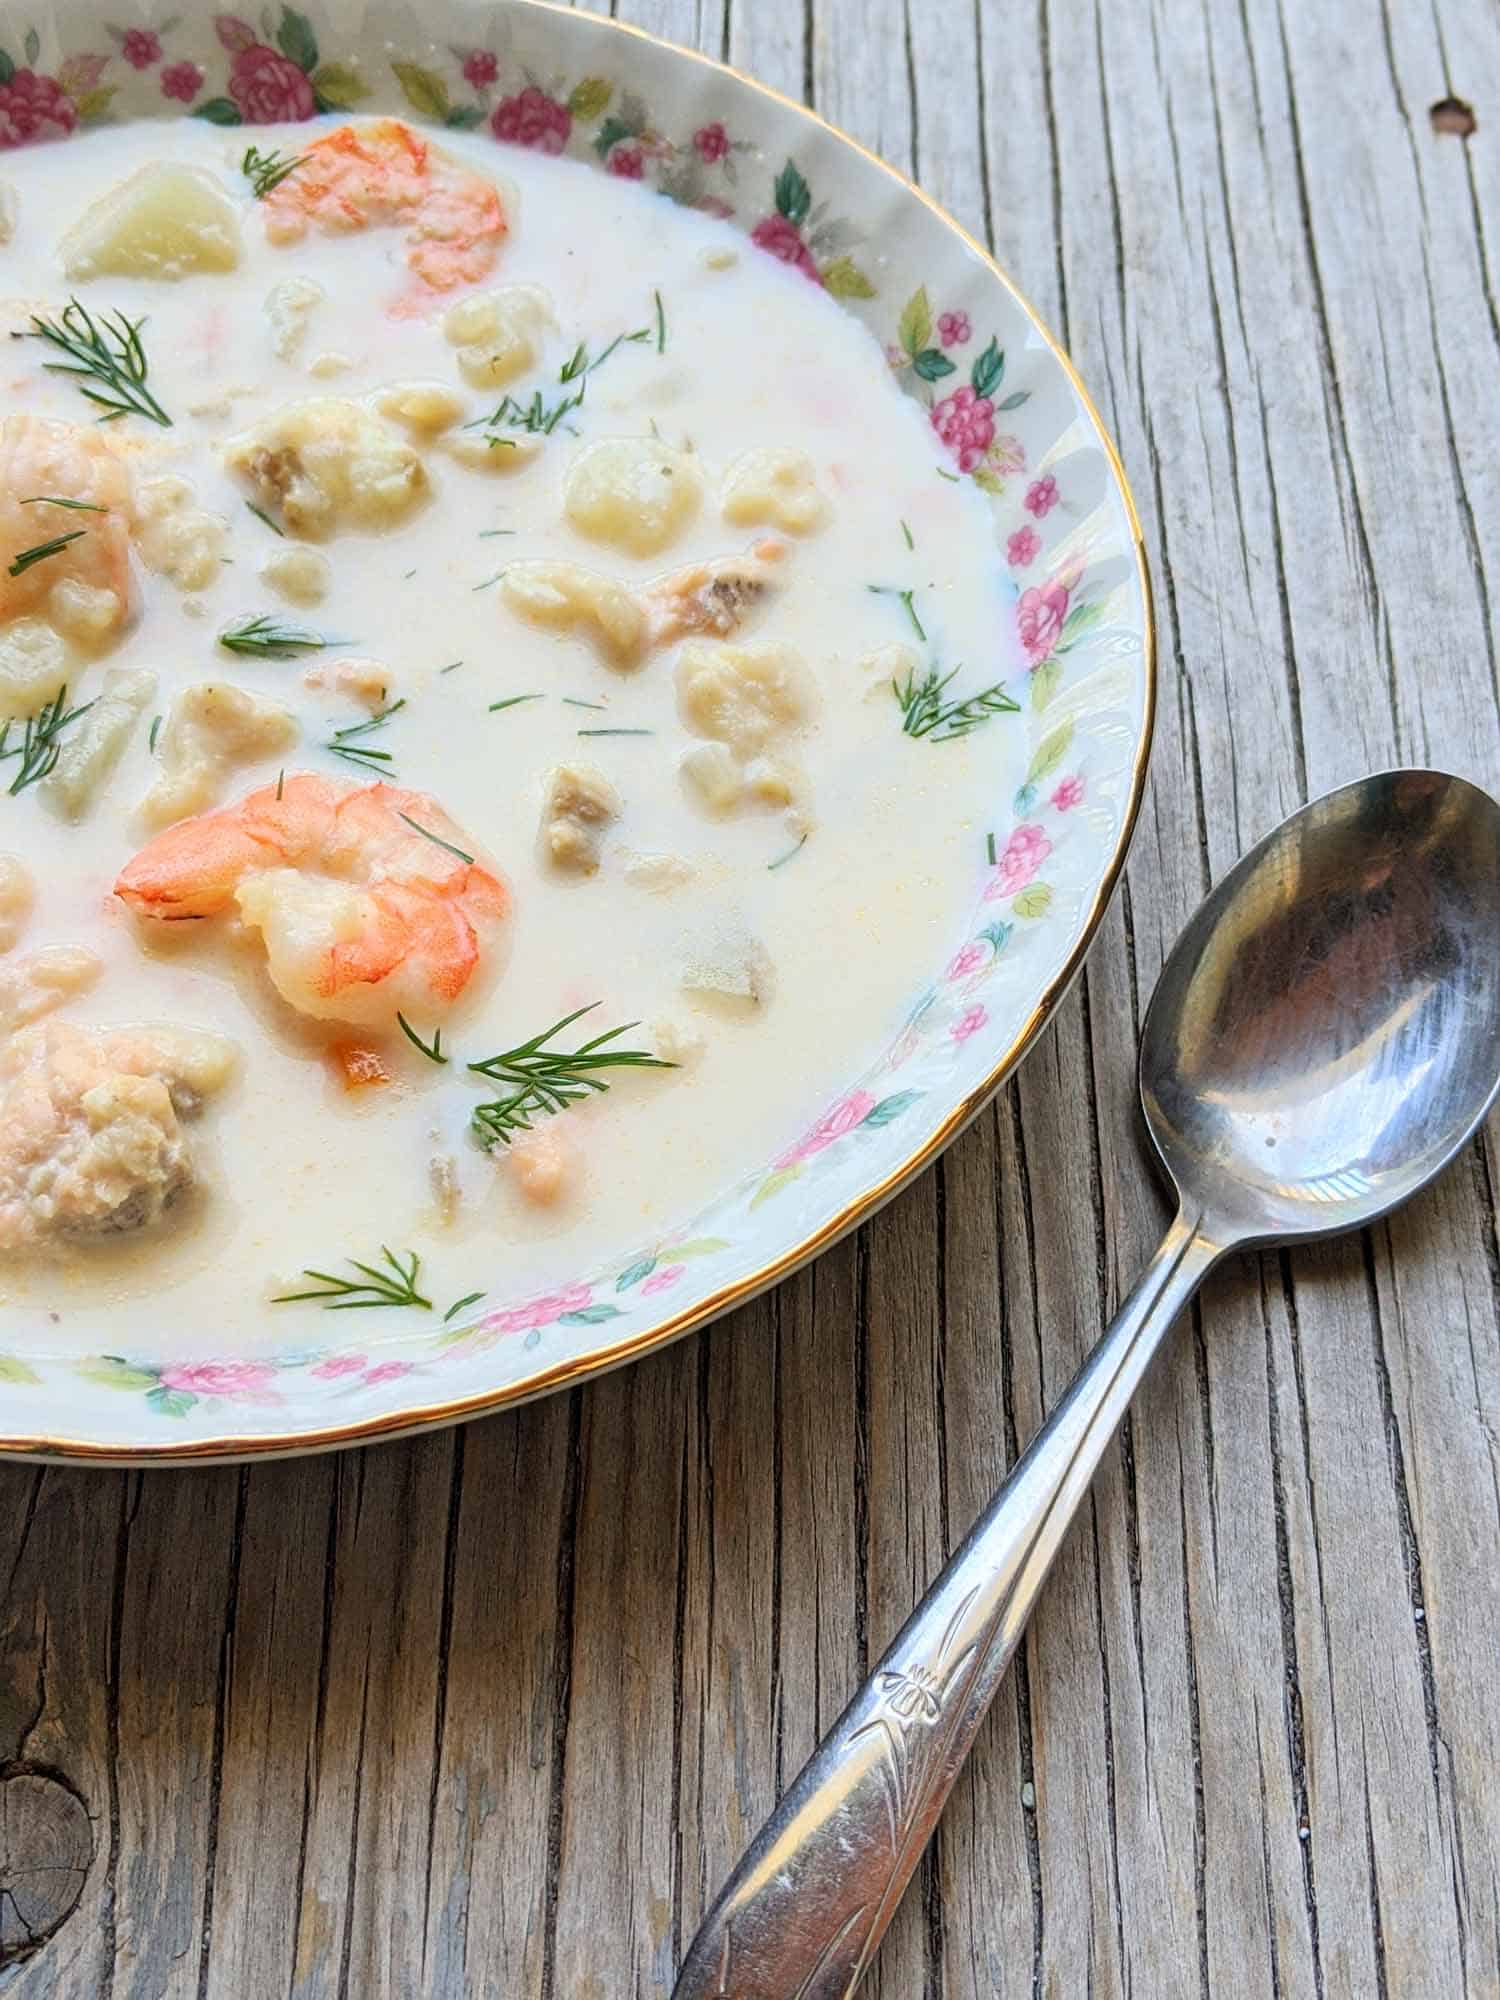 Fish chowder in a vintage bowl on a wooden background.